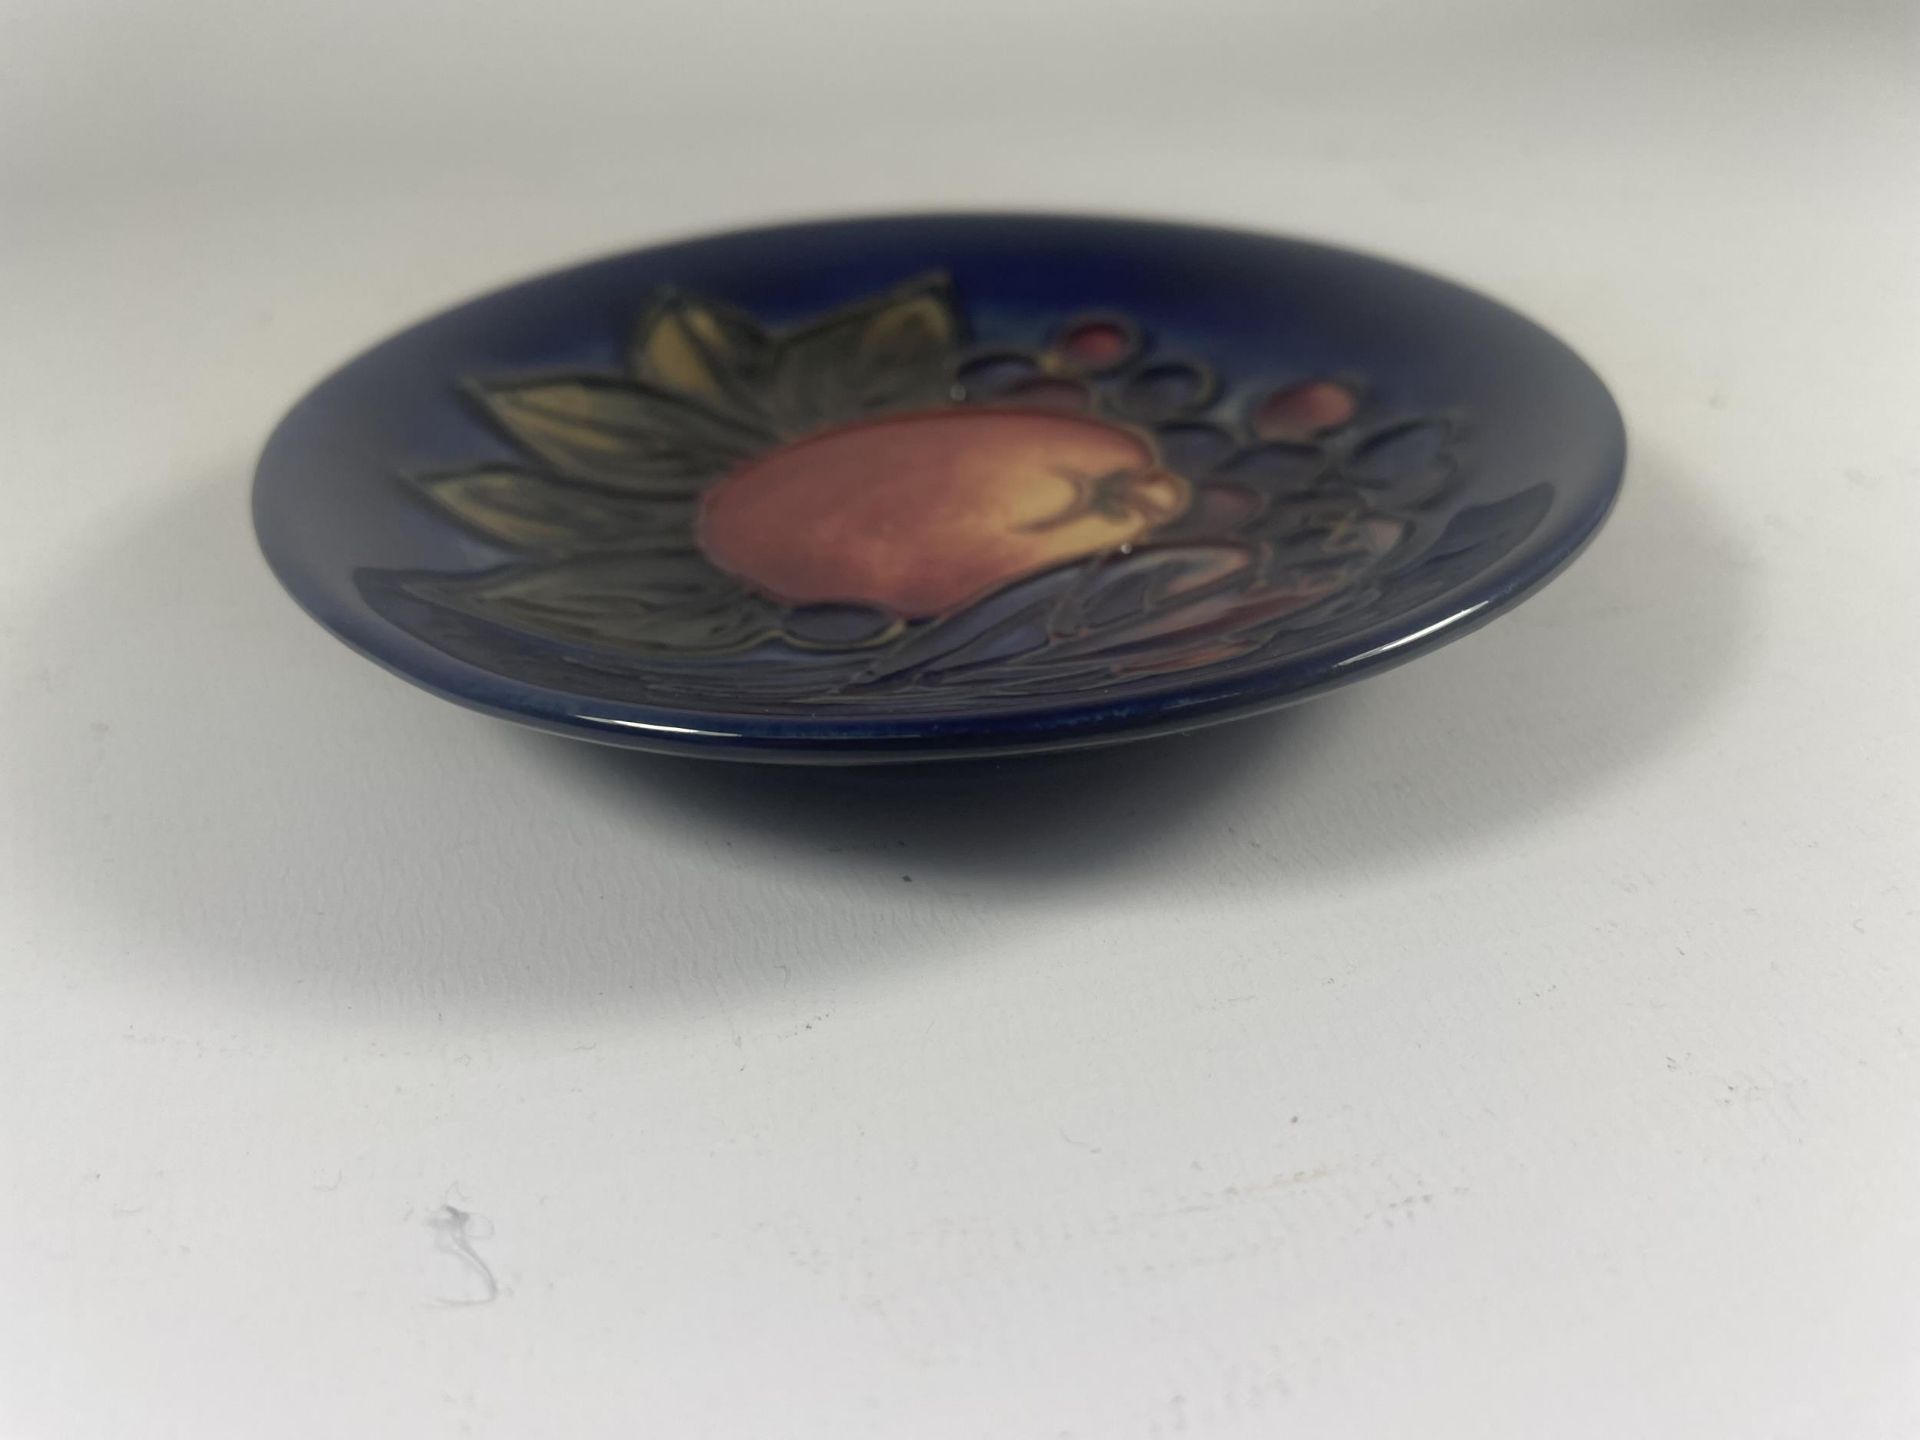 A MOORCROFT POTTERY FINCHES PATTERN PIN TRAY / DISH - Image 2 of 3